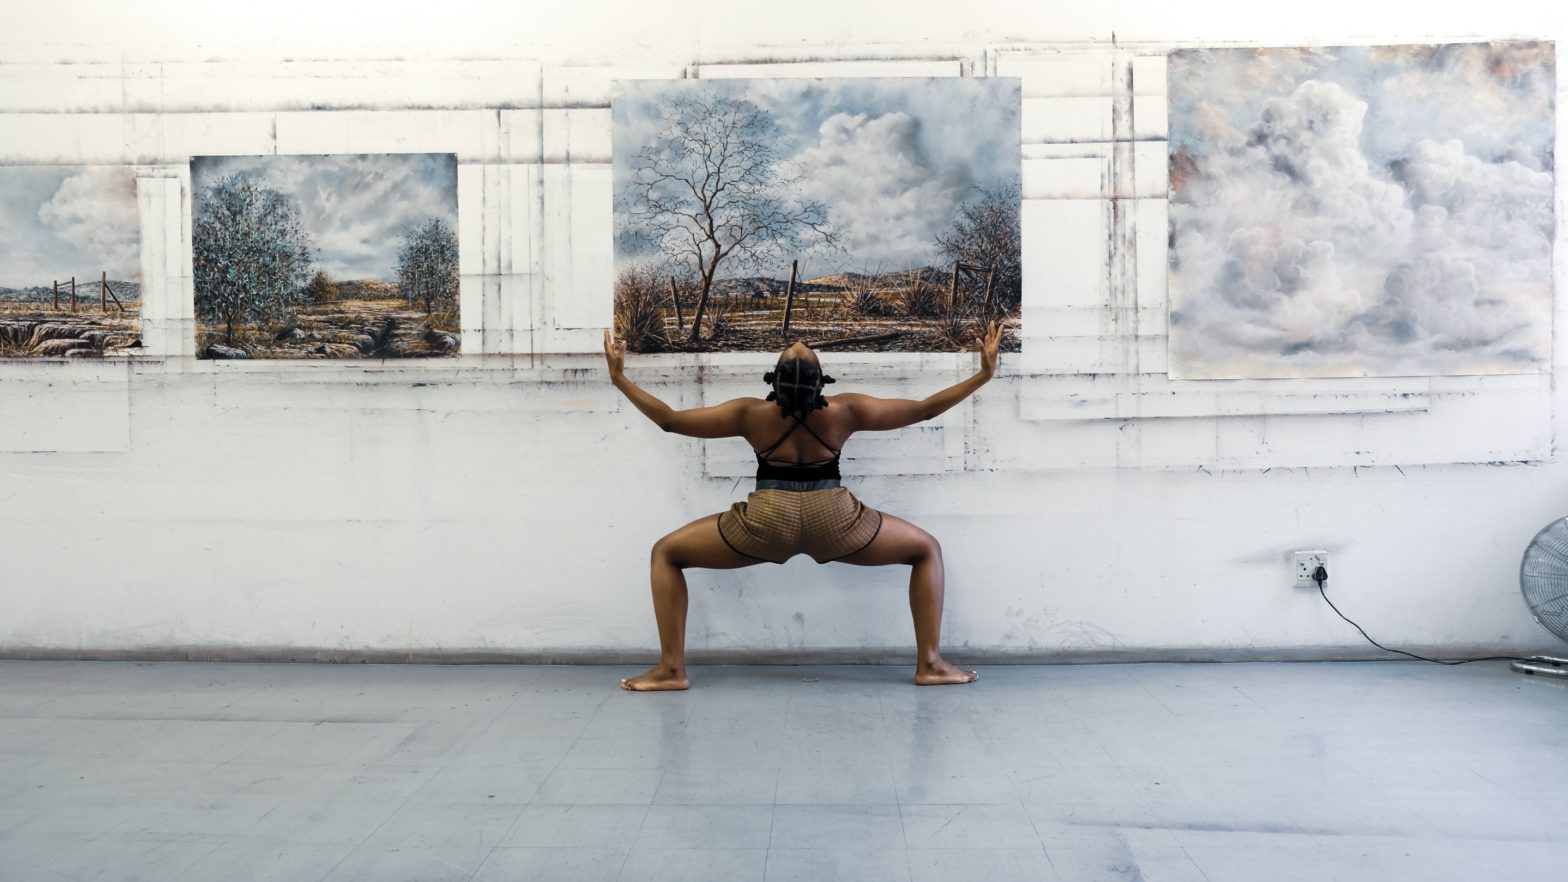 Activate "Namaste" Courtesy Of These Five Black-Owned Yoga Studios